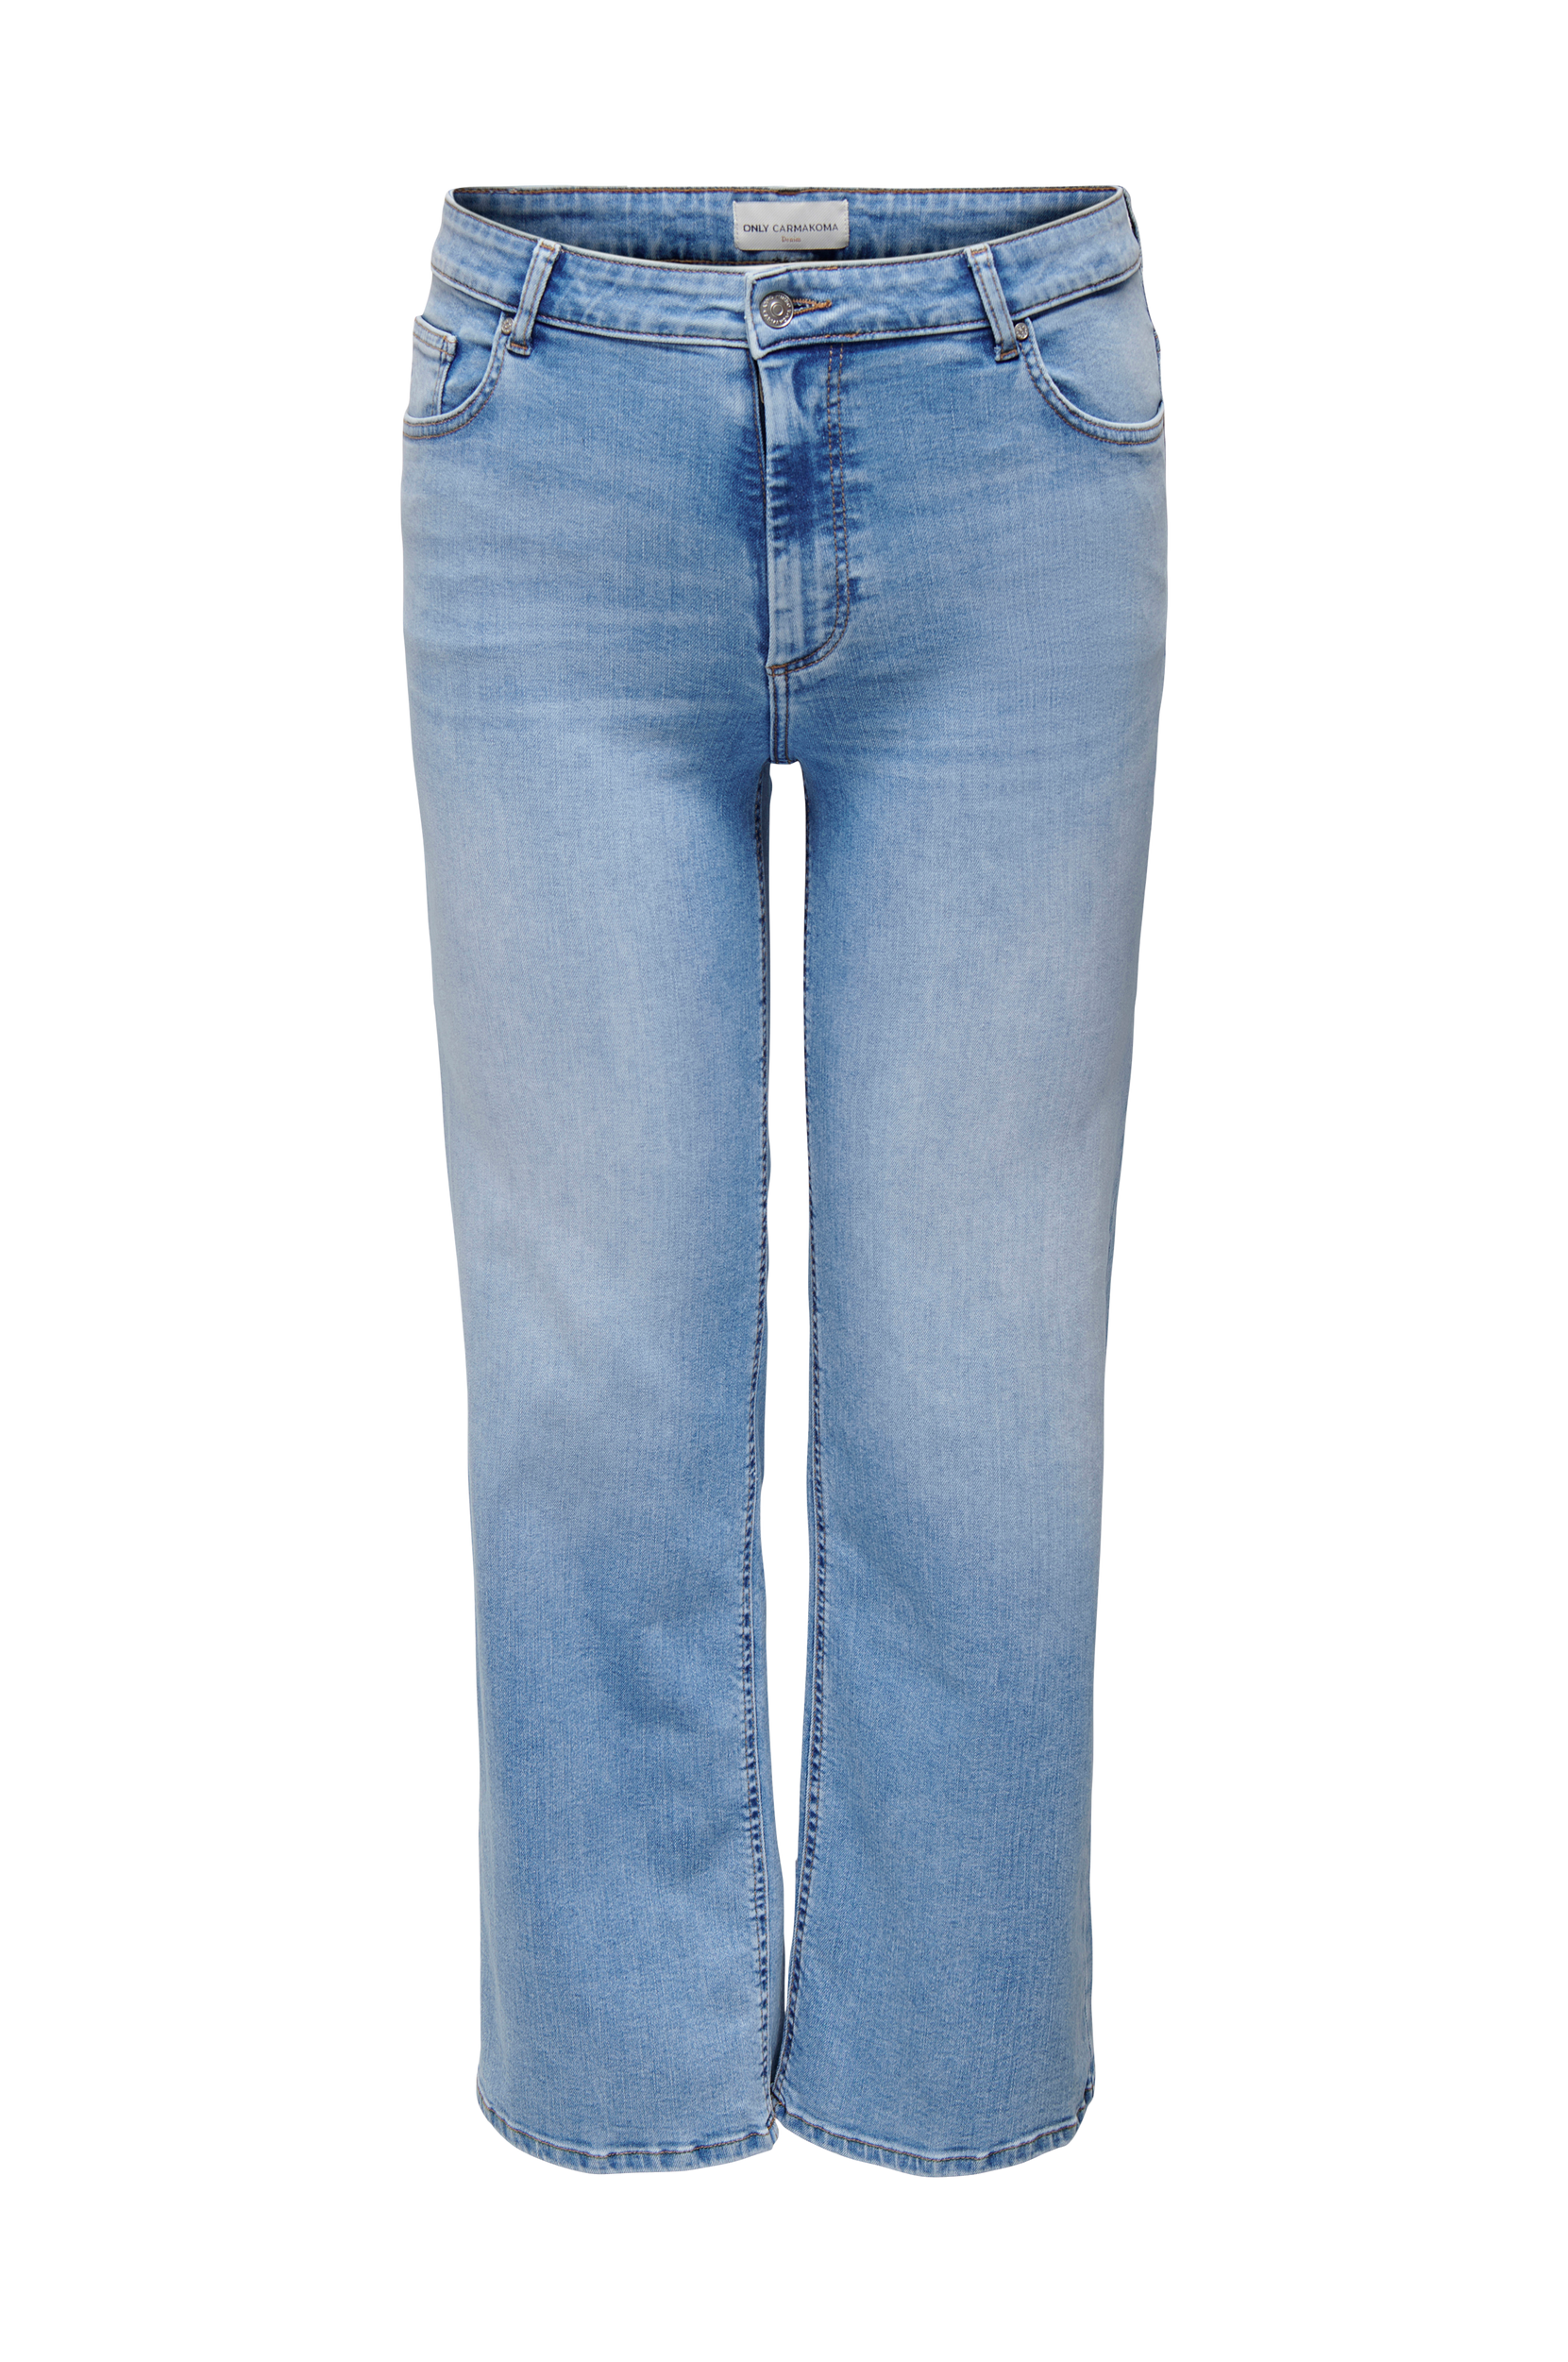 Only Carmakoma - Jeans carWilly HW Wide Dnm - Blå - W50/L32